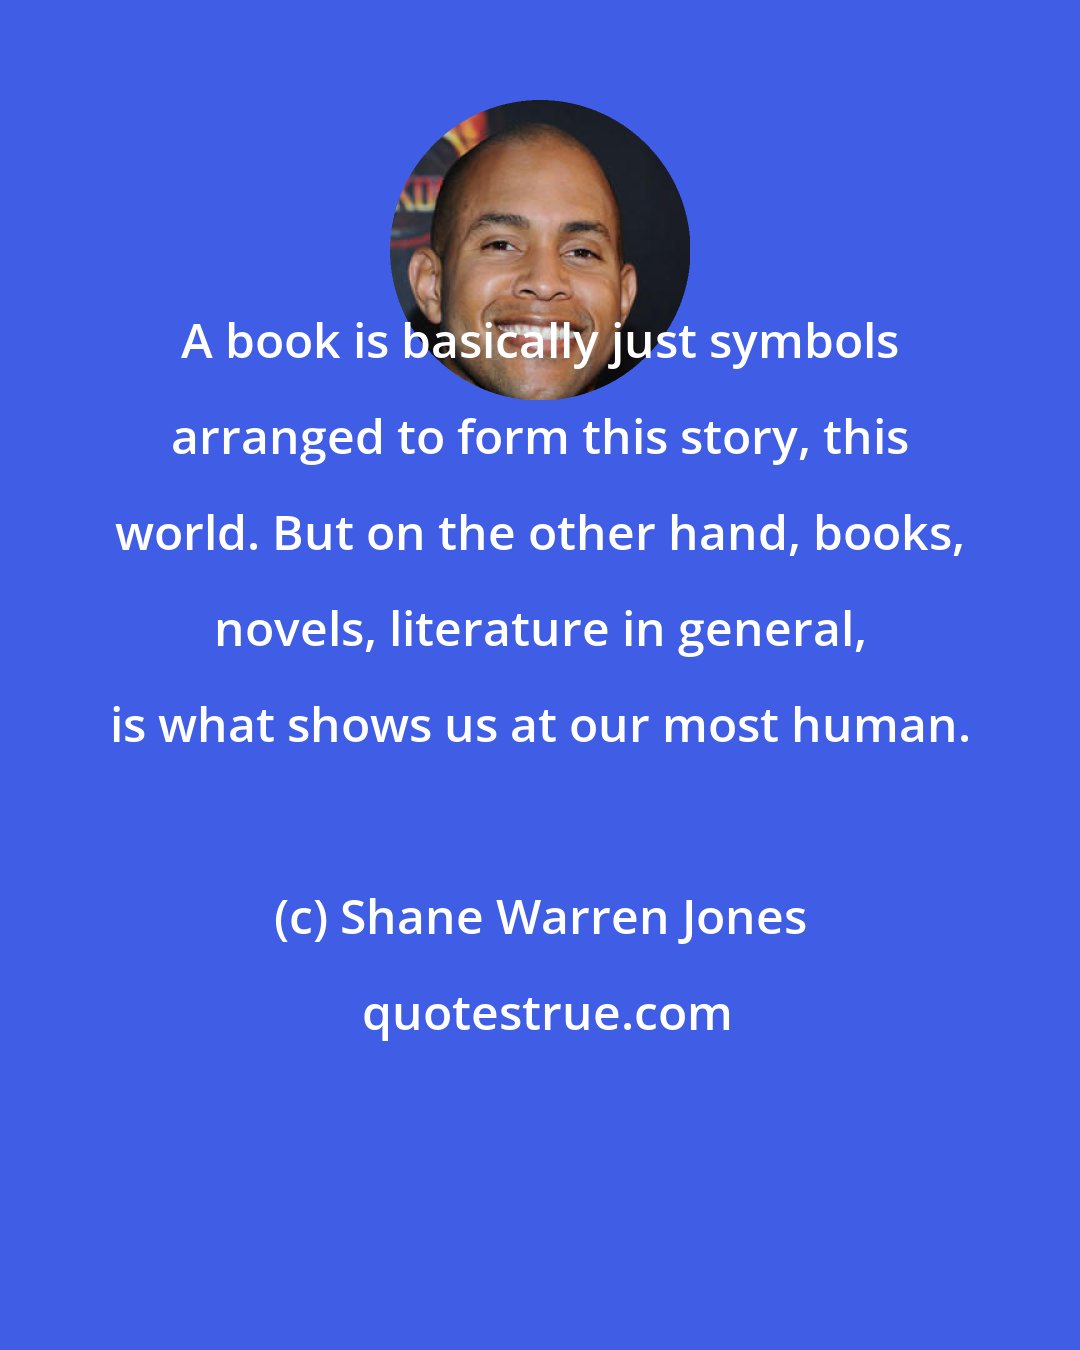 Shane Warren Jones: A book is basically just symbols arranged to form this story, this world. But on the other hand, books, novels, literature in general, is what shows us at our most human.